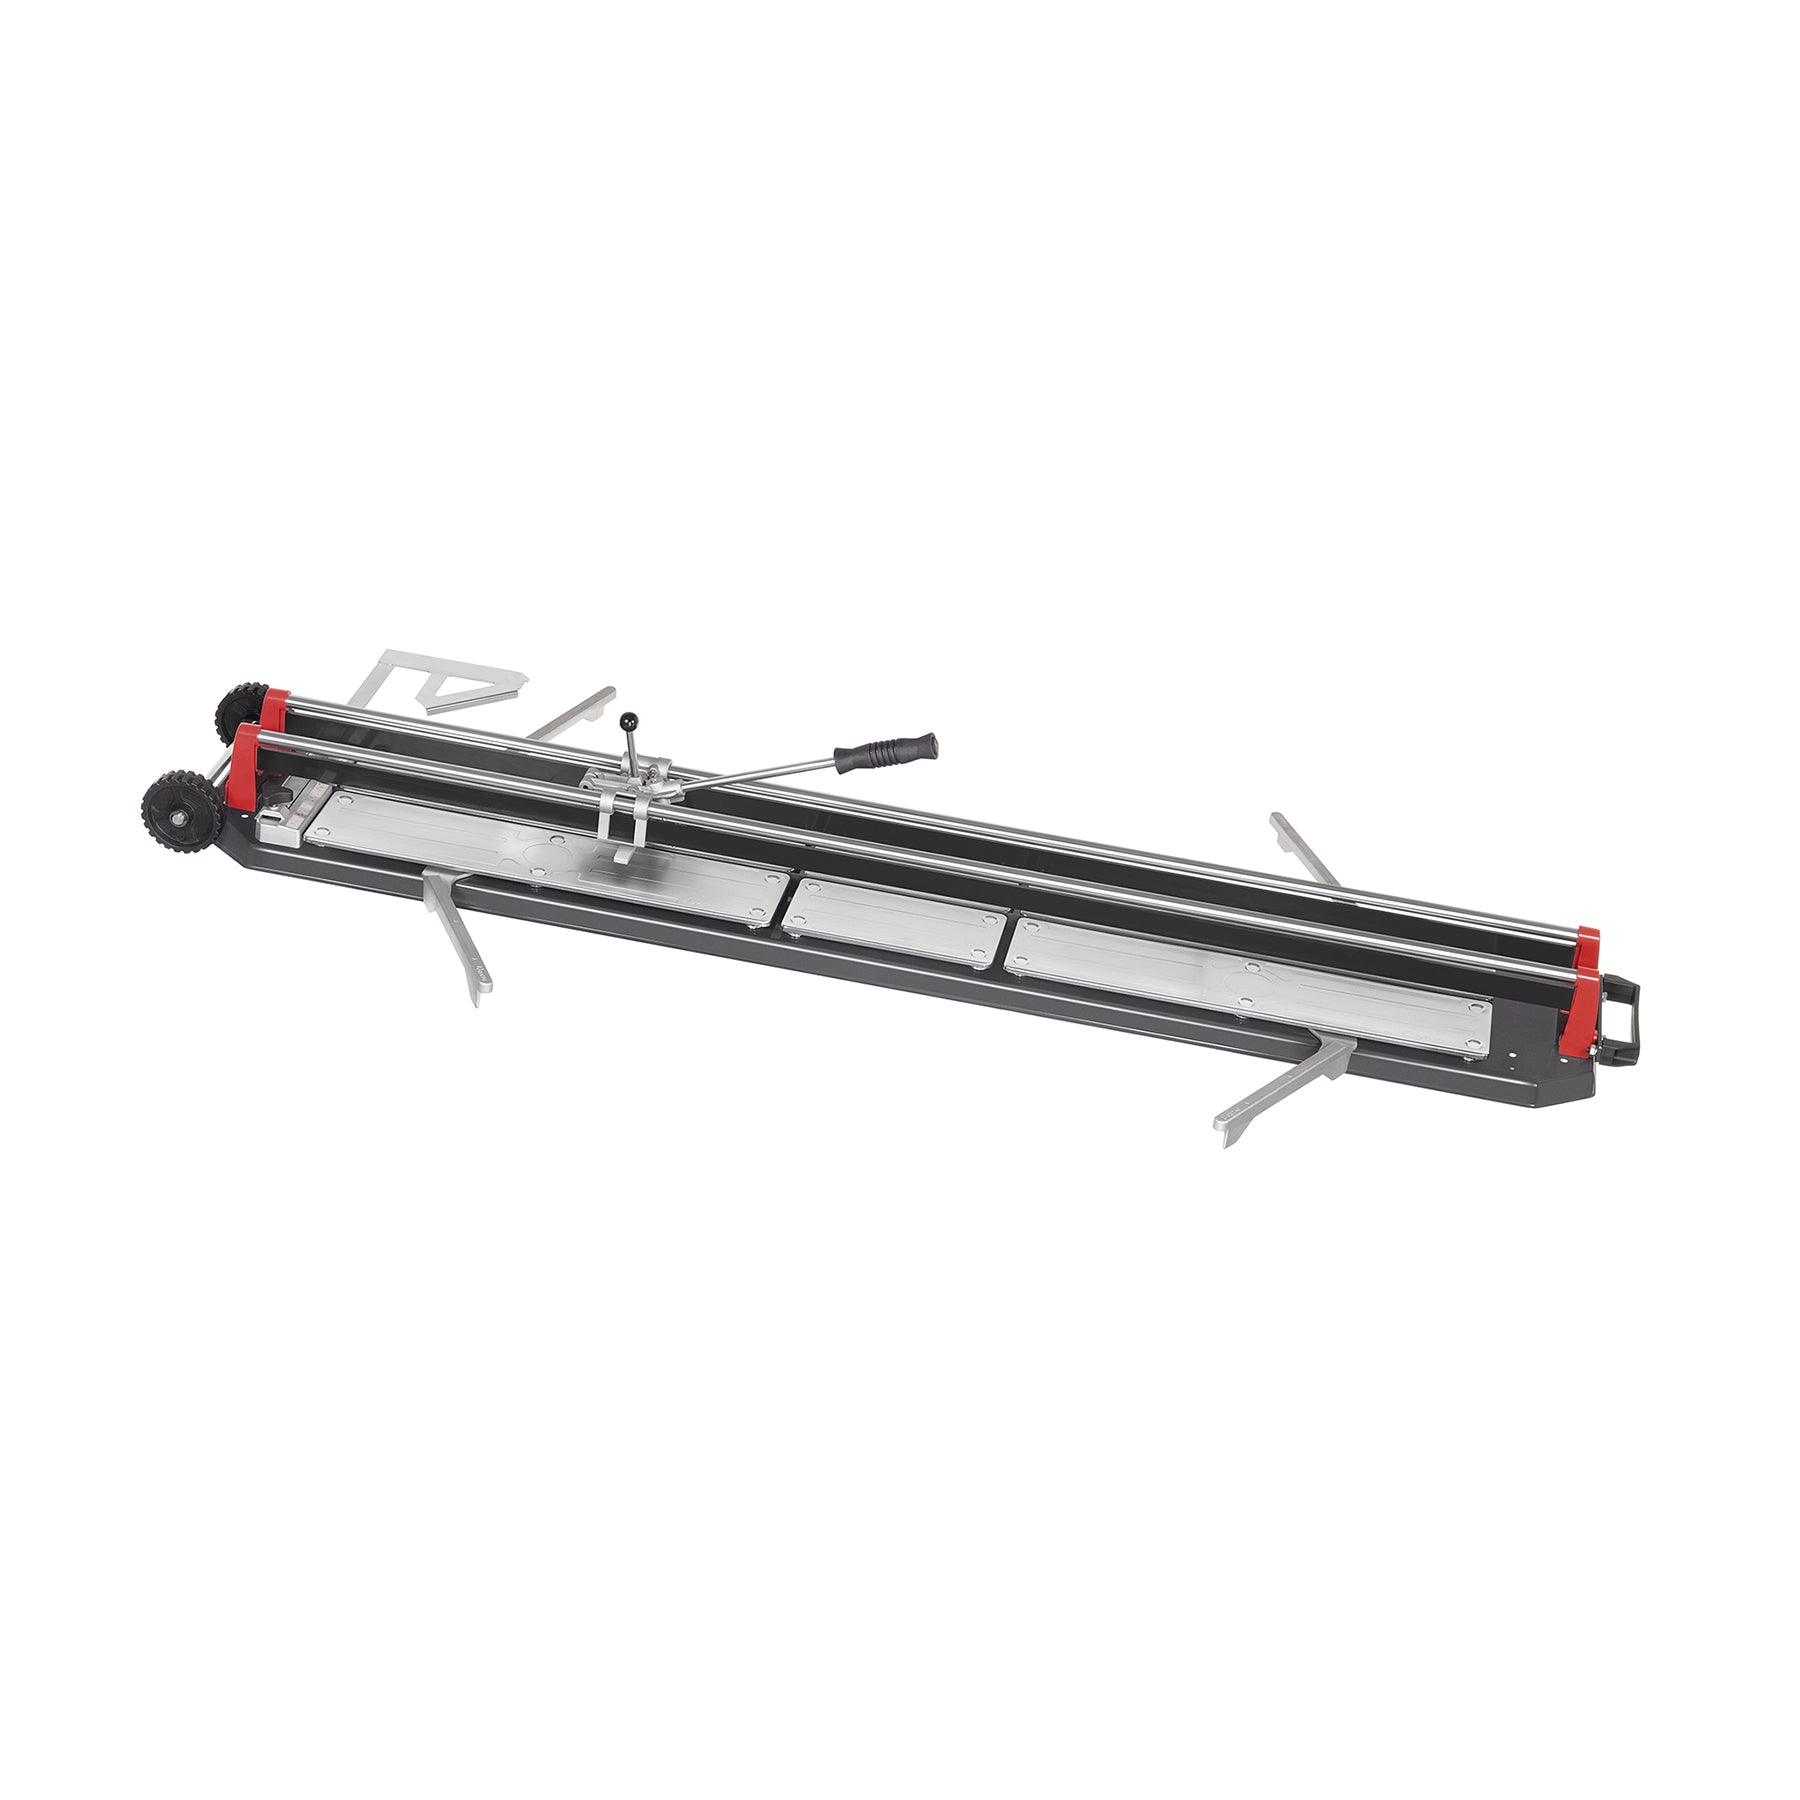 Manual Tile Cutter Master Plus-155 For Ceramic & Porcelain Tiles up to 15mm Thick (For Diagonal Cutting 110 cm X 110 cm)